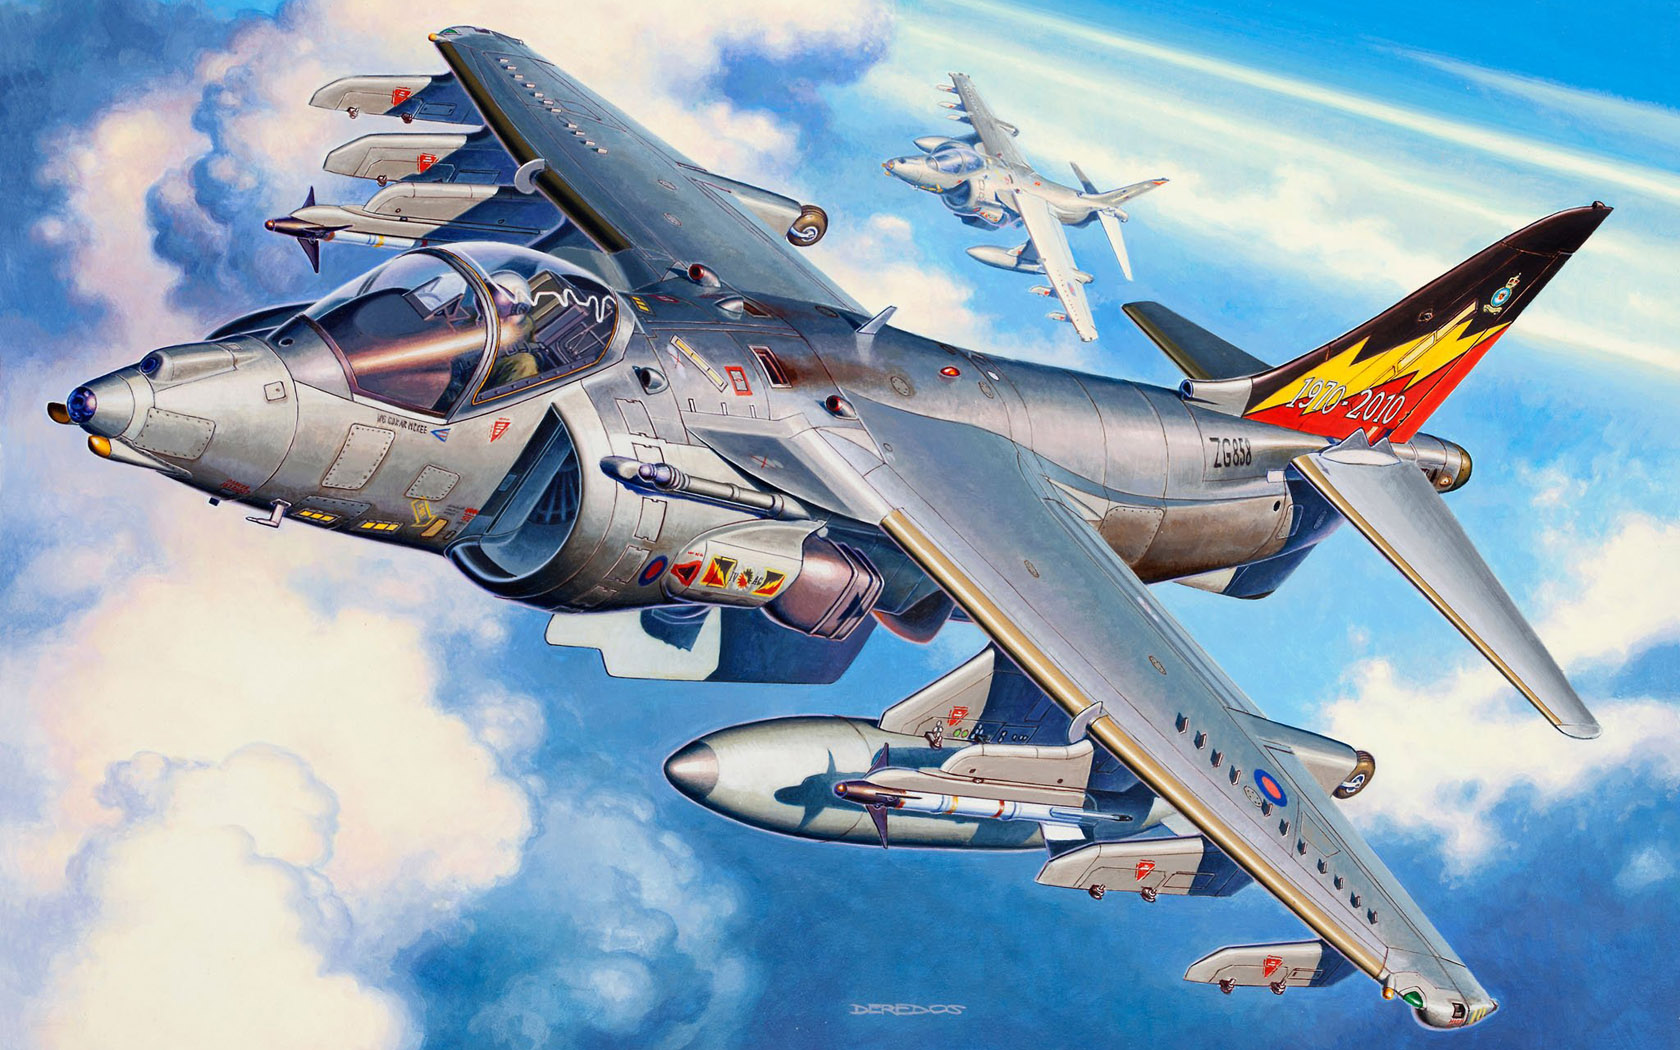 General 1680x1050 aircraft flying sky military artwork clouds missiles jet fighter Royal Navy military aircraft Harrier Andrzej Deredos Boxart